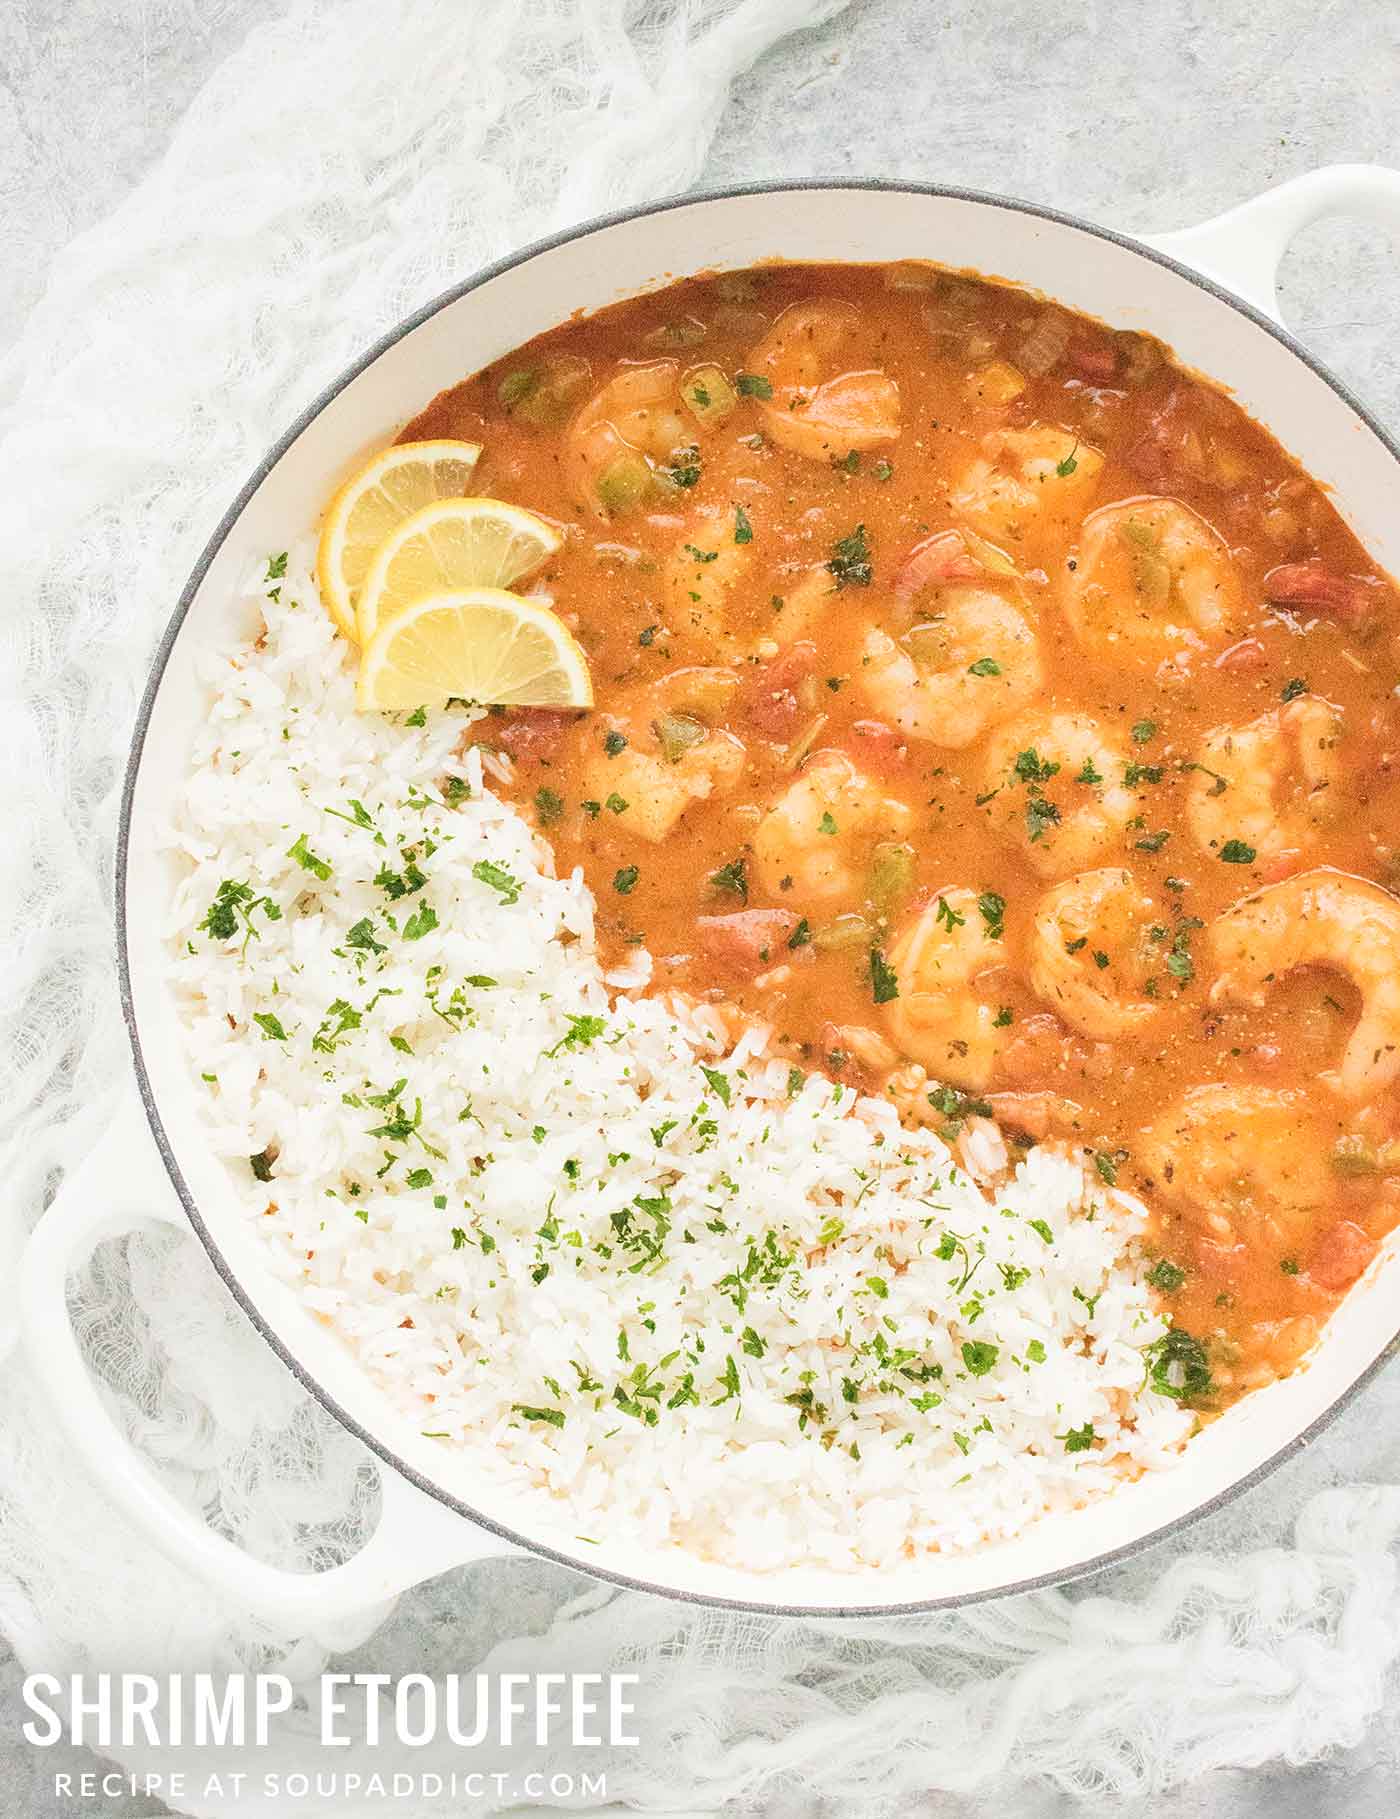 A white Dutch oven filled with saucy Shrimp Etouffee and herbed white rice